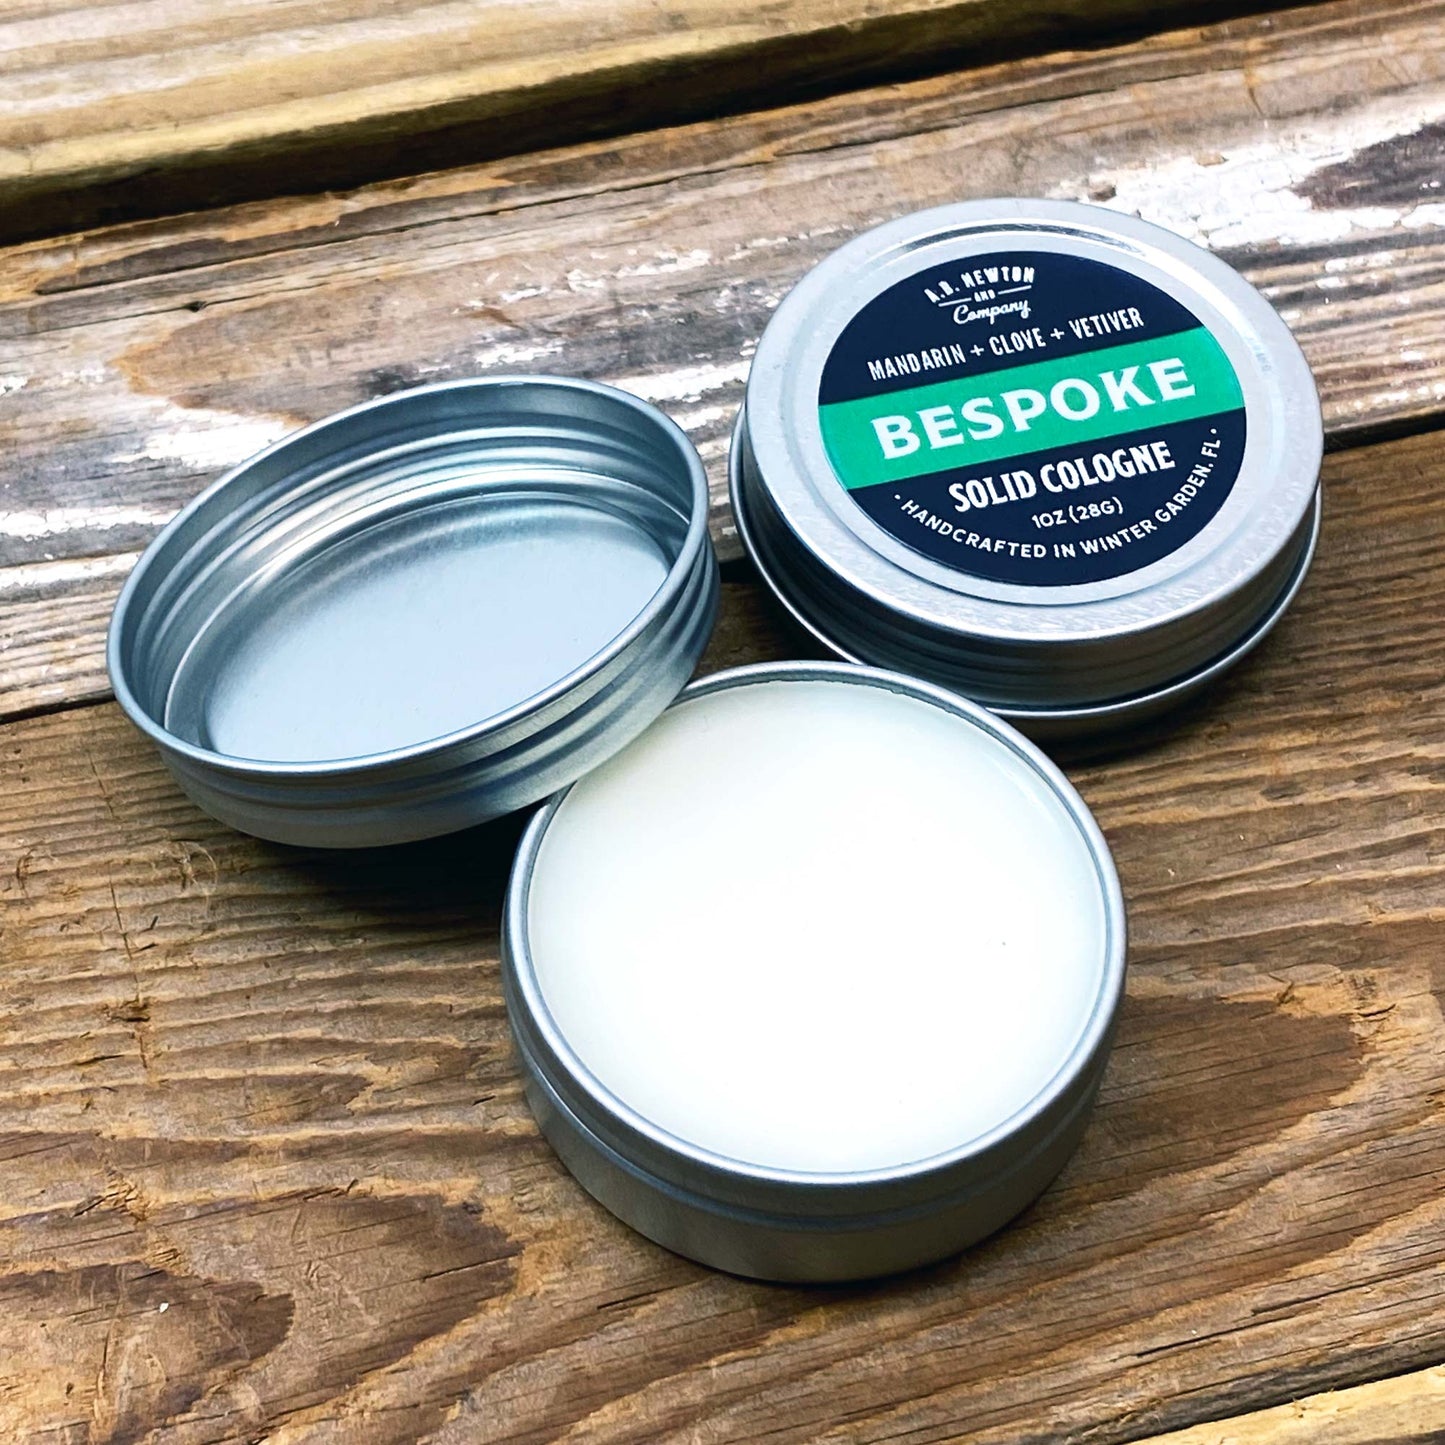 Bespoke Handcrafted All Natural Solid Cologne 1oz